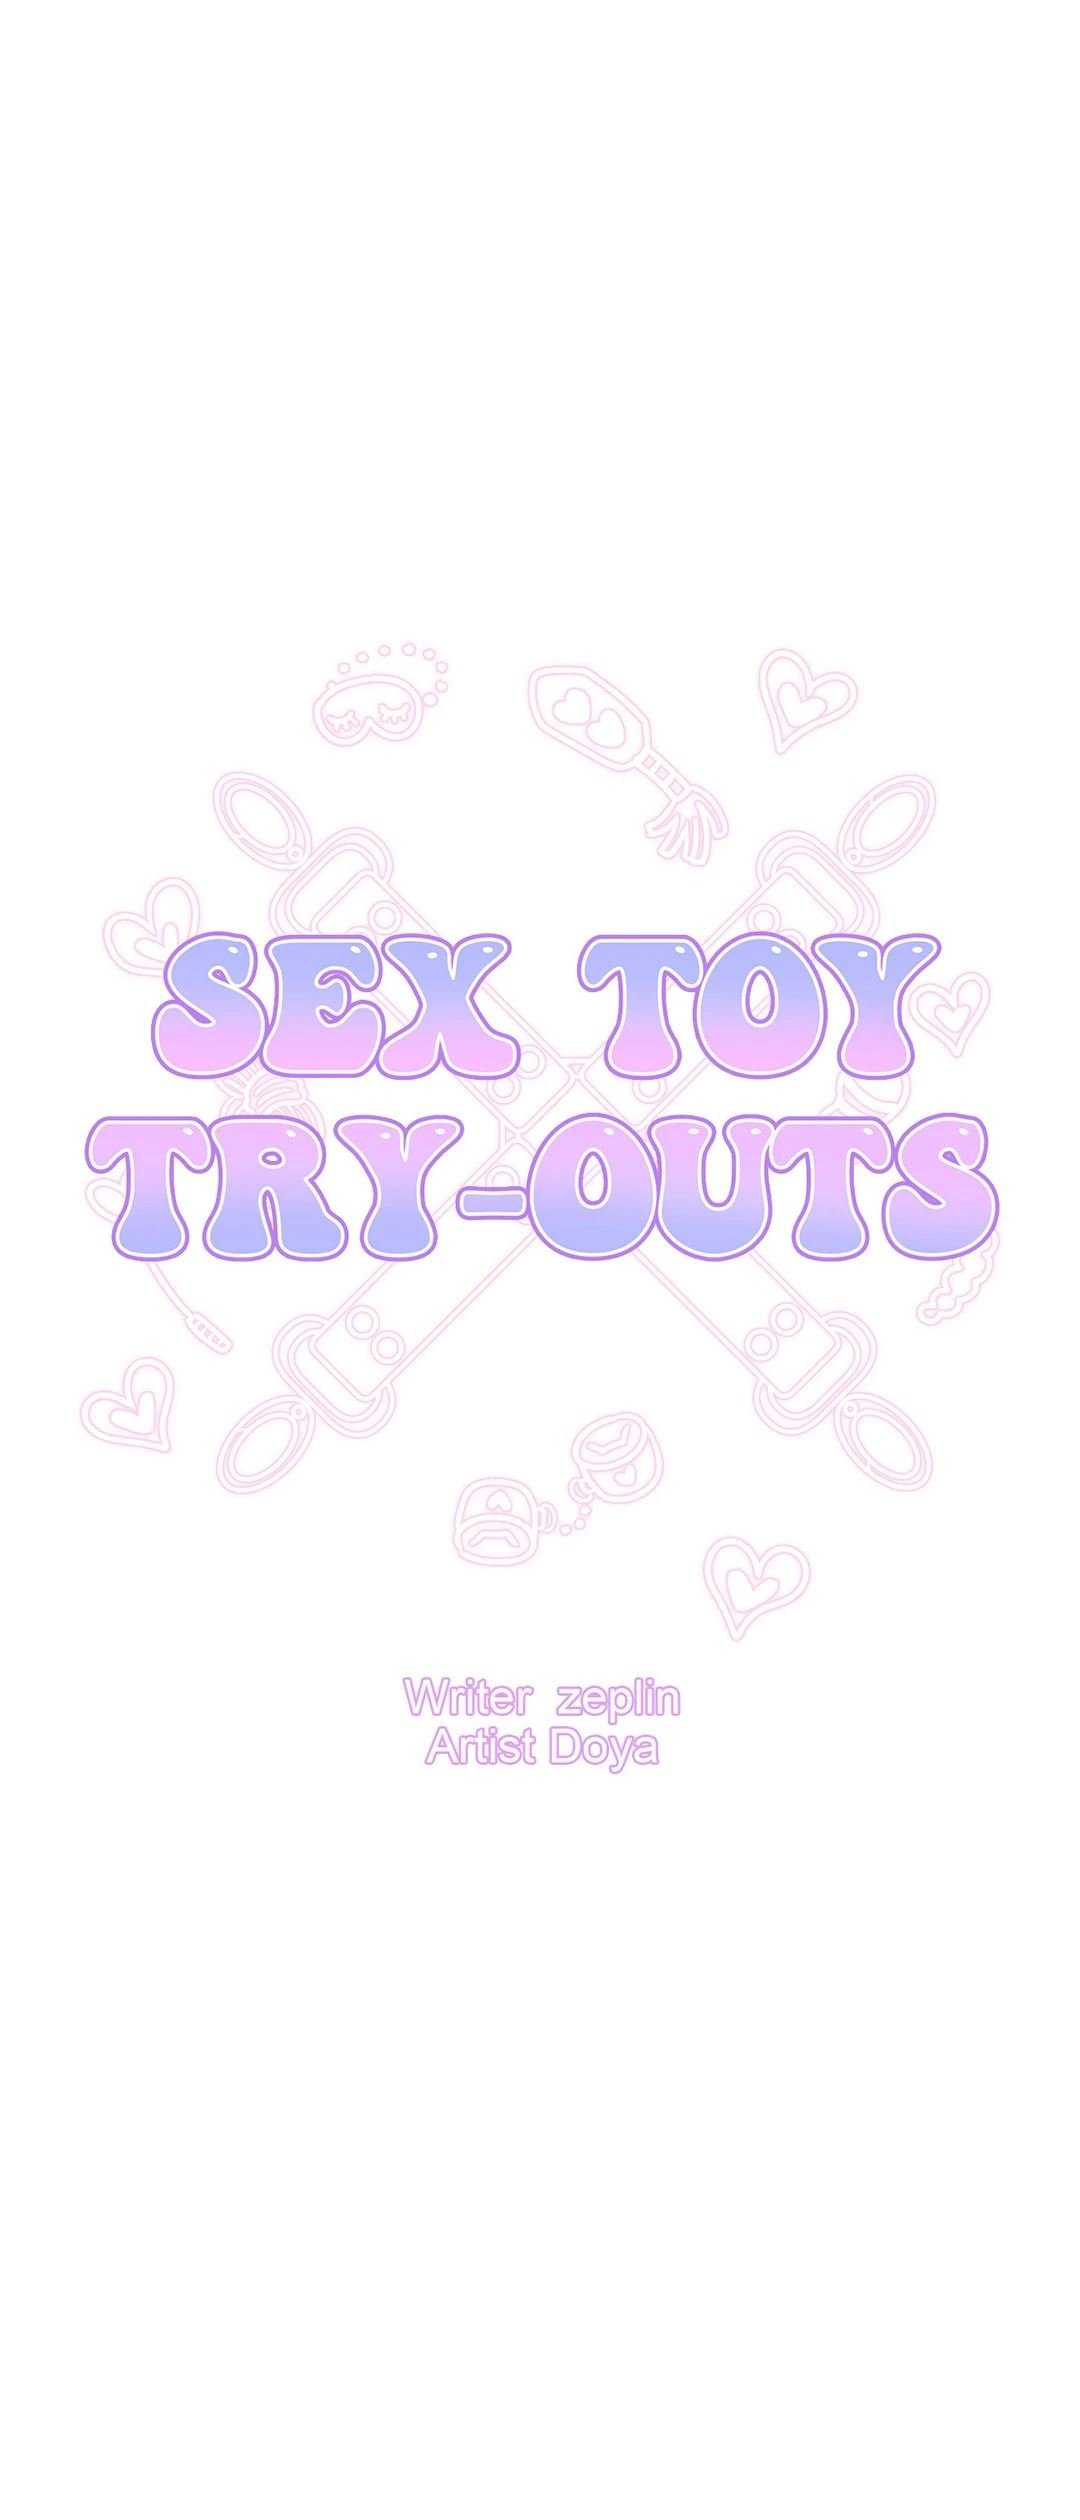 sex-toy-try-outs-chap-27-2